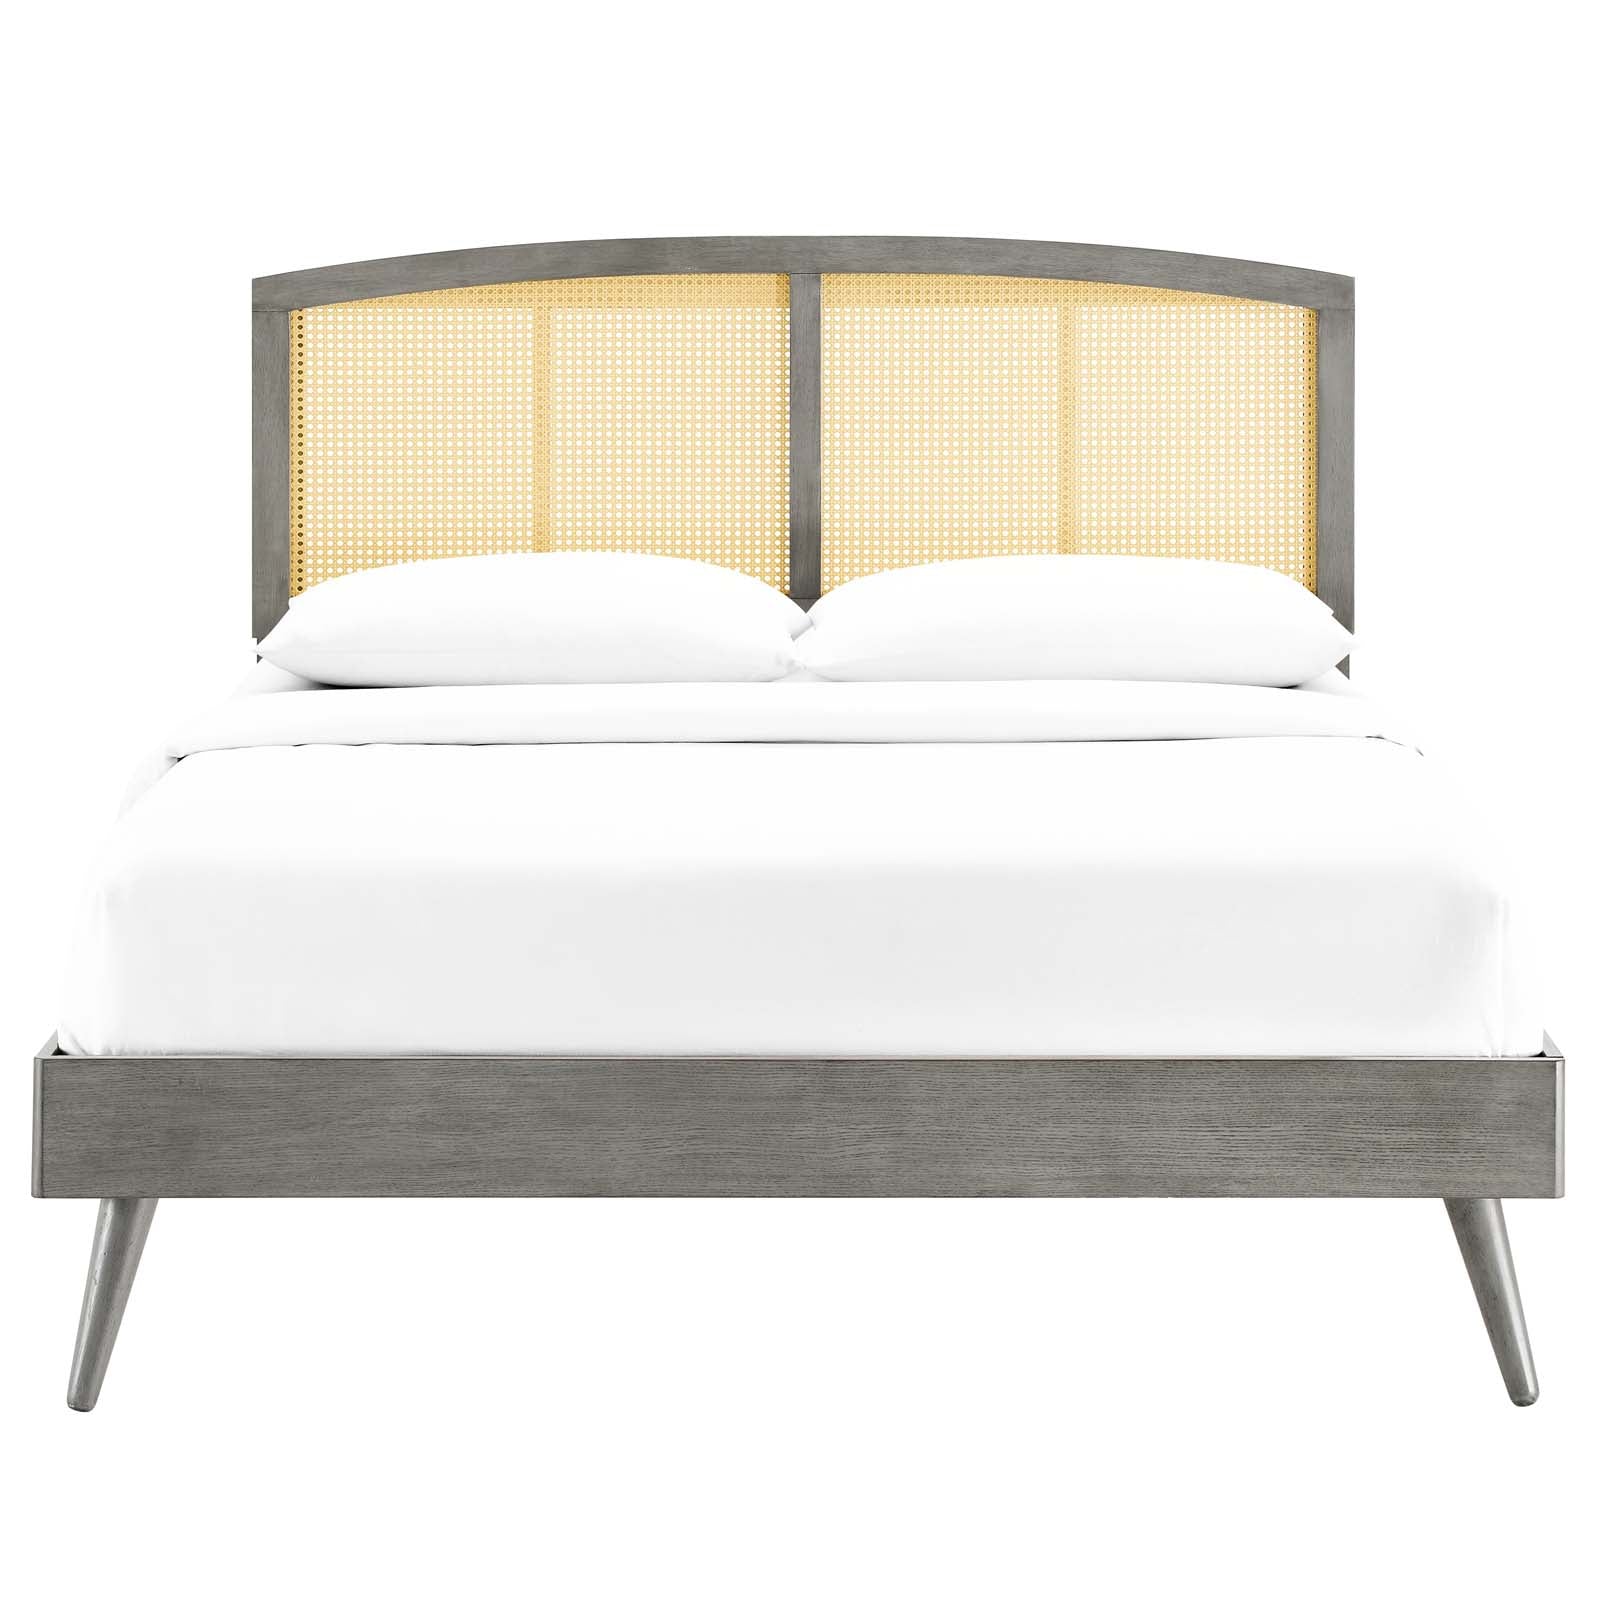 Modway Beds - Sierra Cane and Wood Full Platform Bed With Splayed Legs Gray